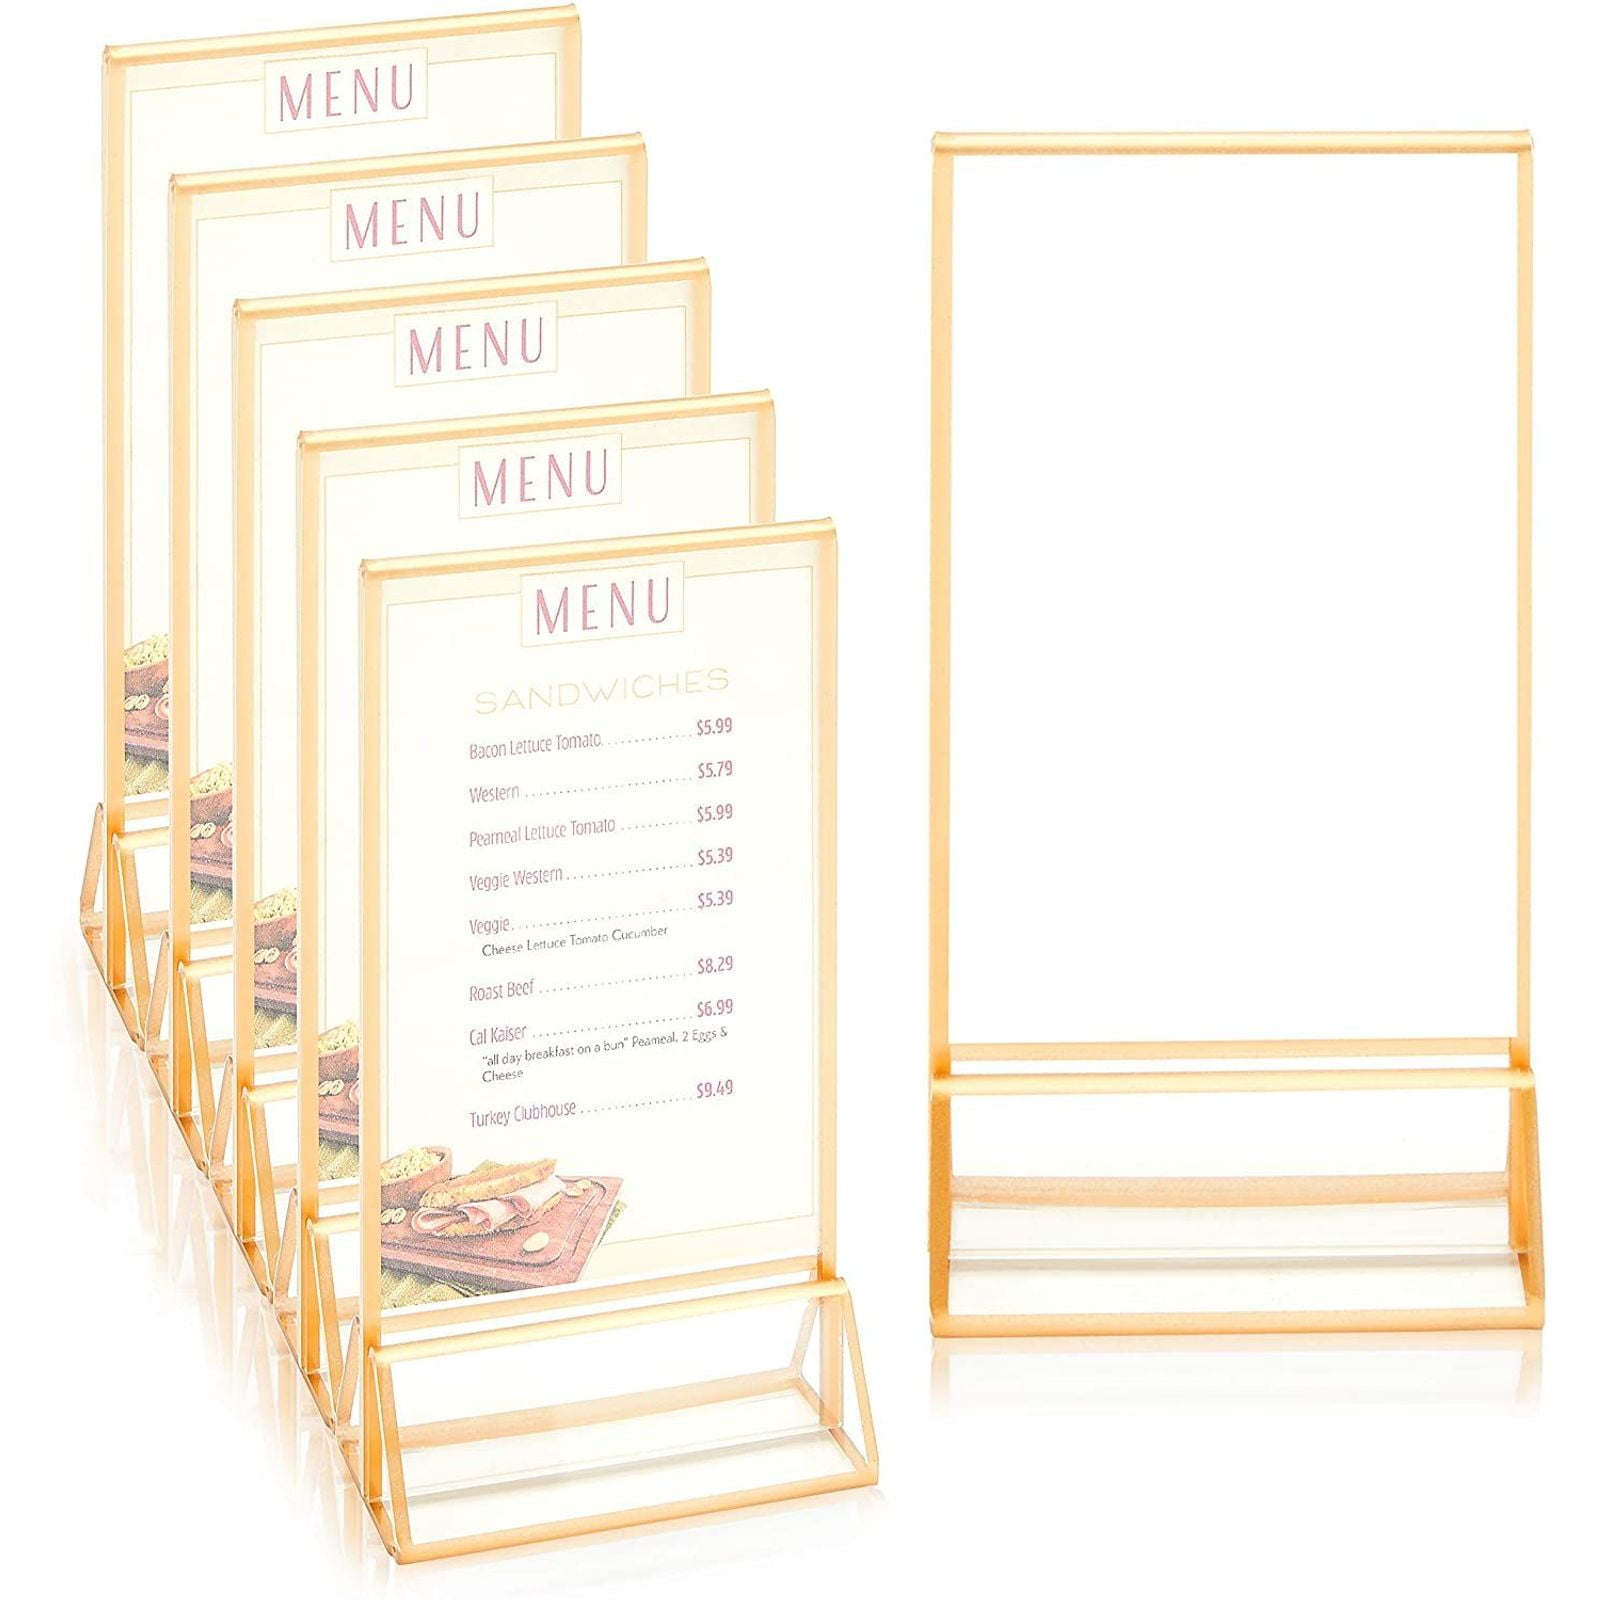 4”W x 5”H Small Frame Two Sided Table Sign Holder Table Tent Lot of 24 Wholesale 